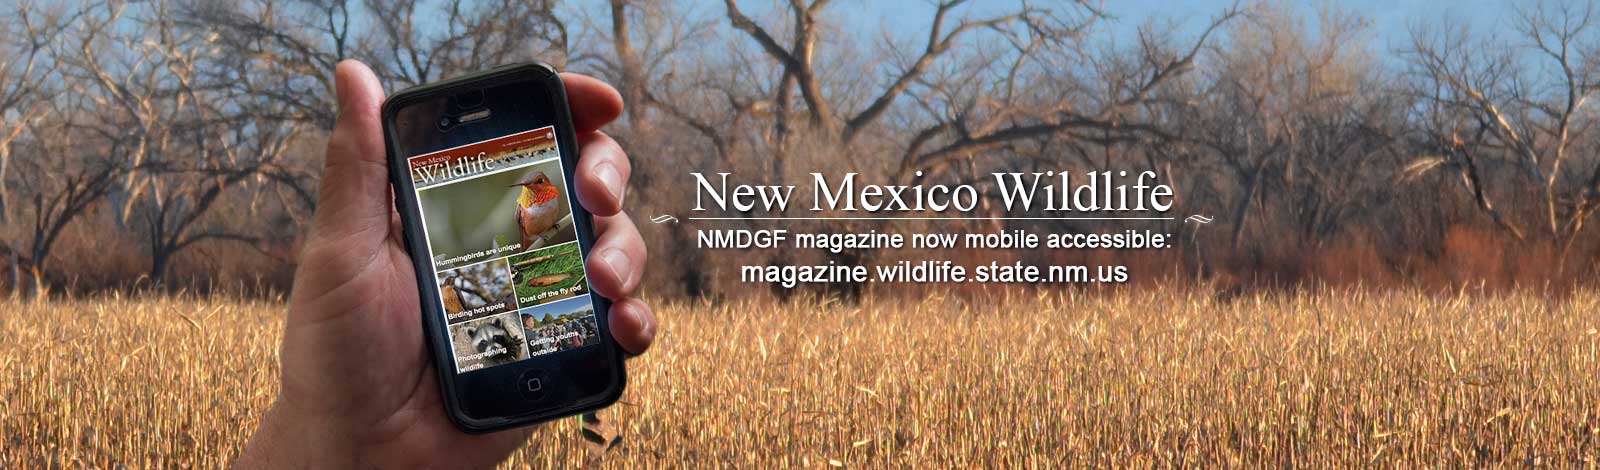 NMDGF New Mexico Wildlife magazine now available online magazine.wildlife.state.nm.us features Department activities, native wildlife and outdoor recreation, including hunting and fishing.